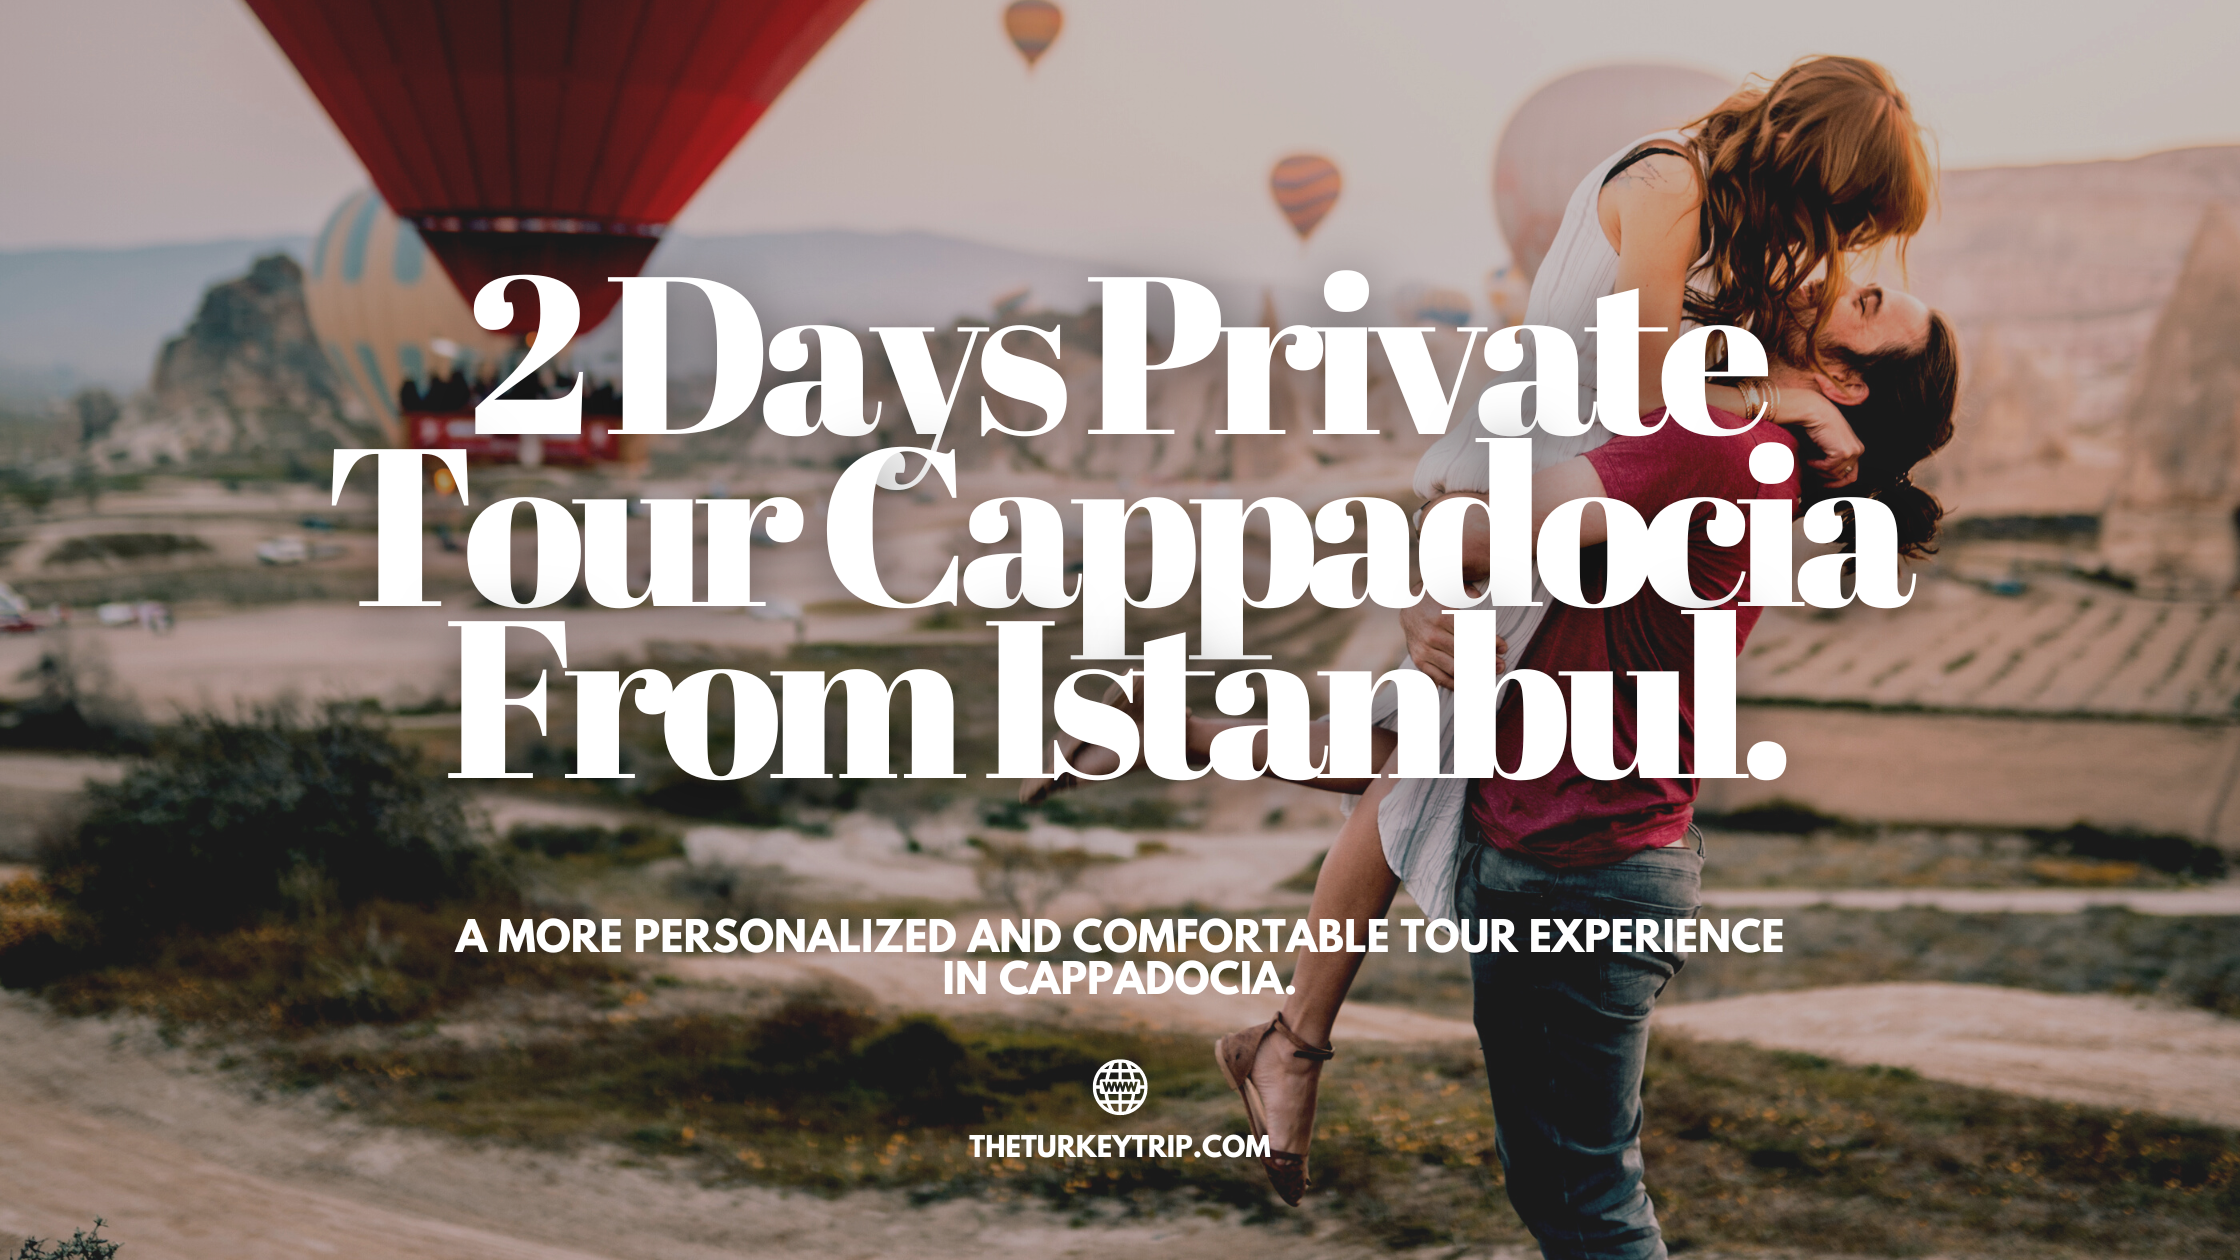 2 days private tour cappadocia package from istanbul with flights